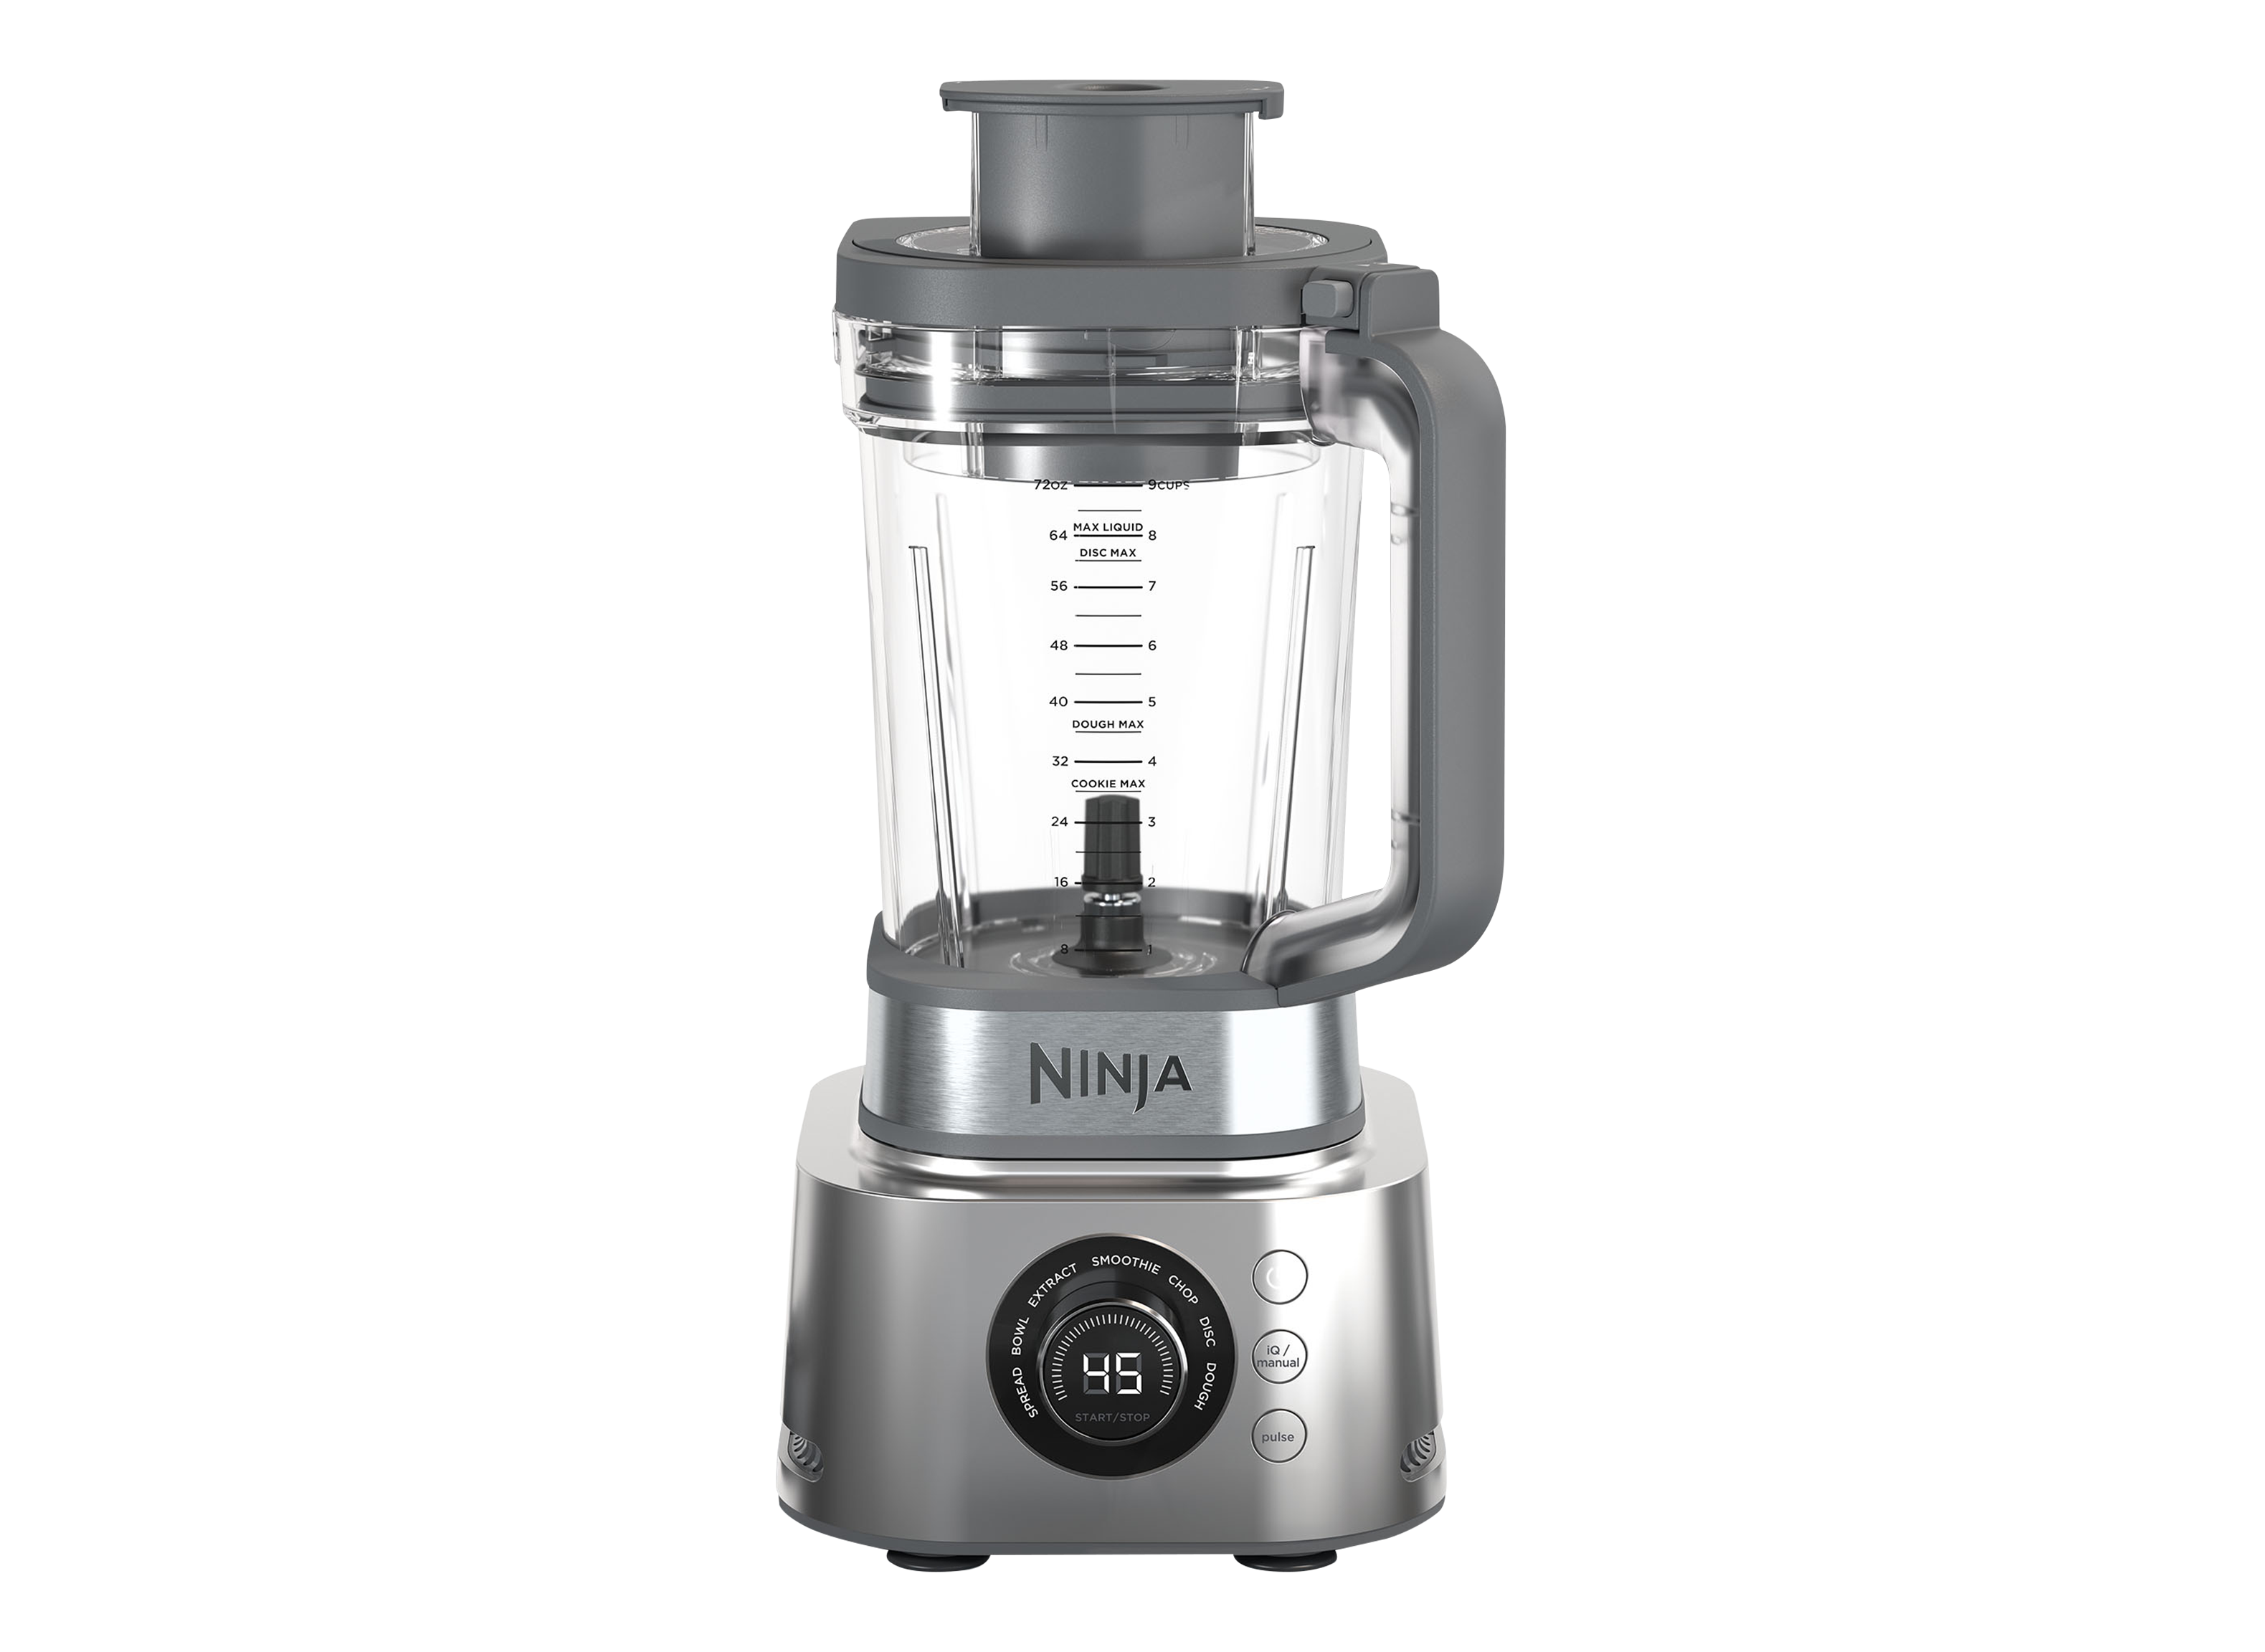 https://crdms.images.consumerreports.org/prod/products/cr/models/405215-food-processors-ninja-foodi-ultimate-system-ss401-10024942.png